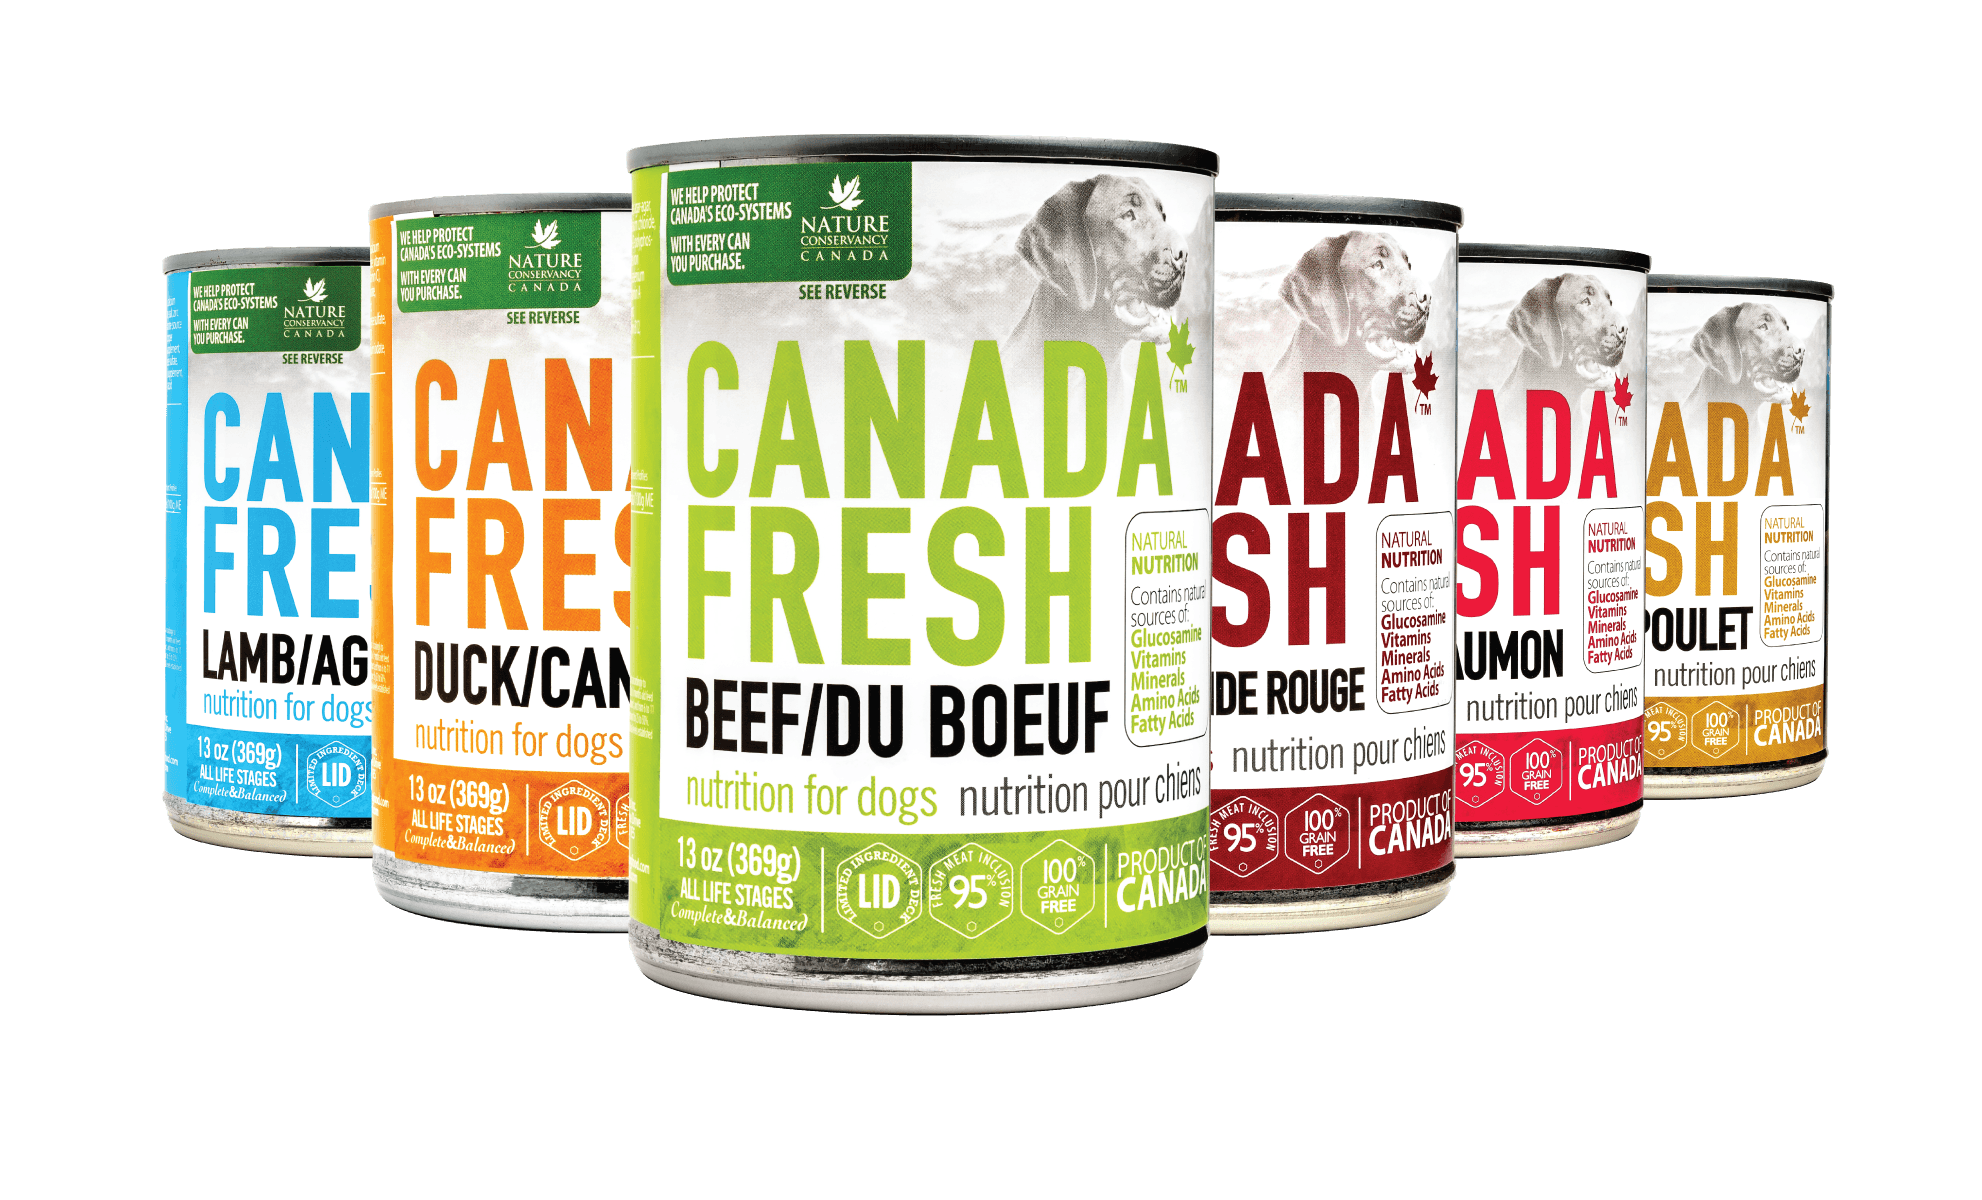 13 oz cans of all variants of the Canada Fresh dog range